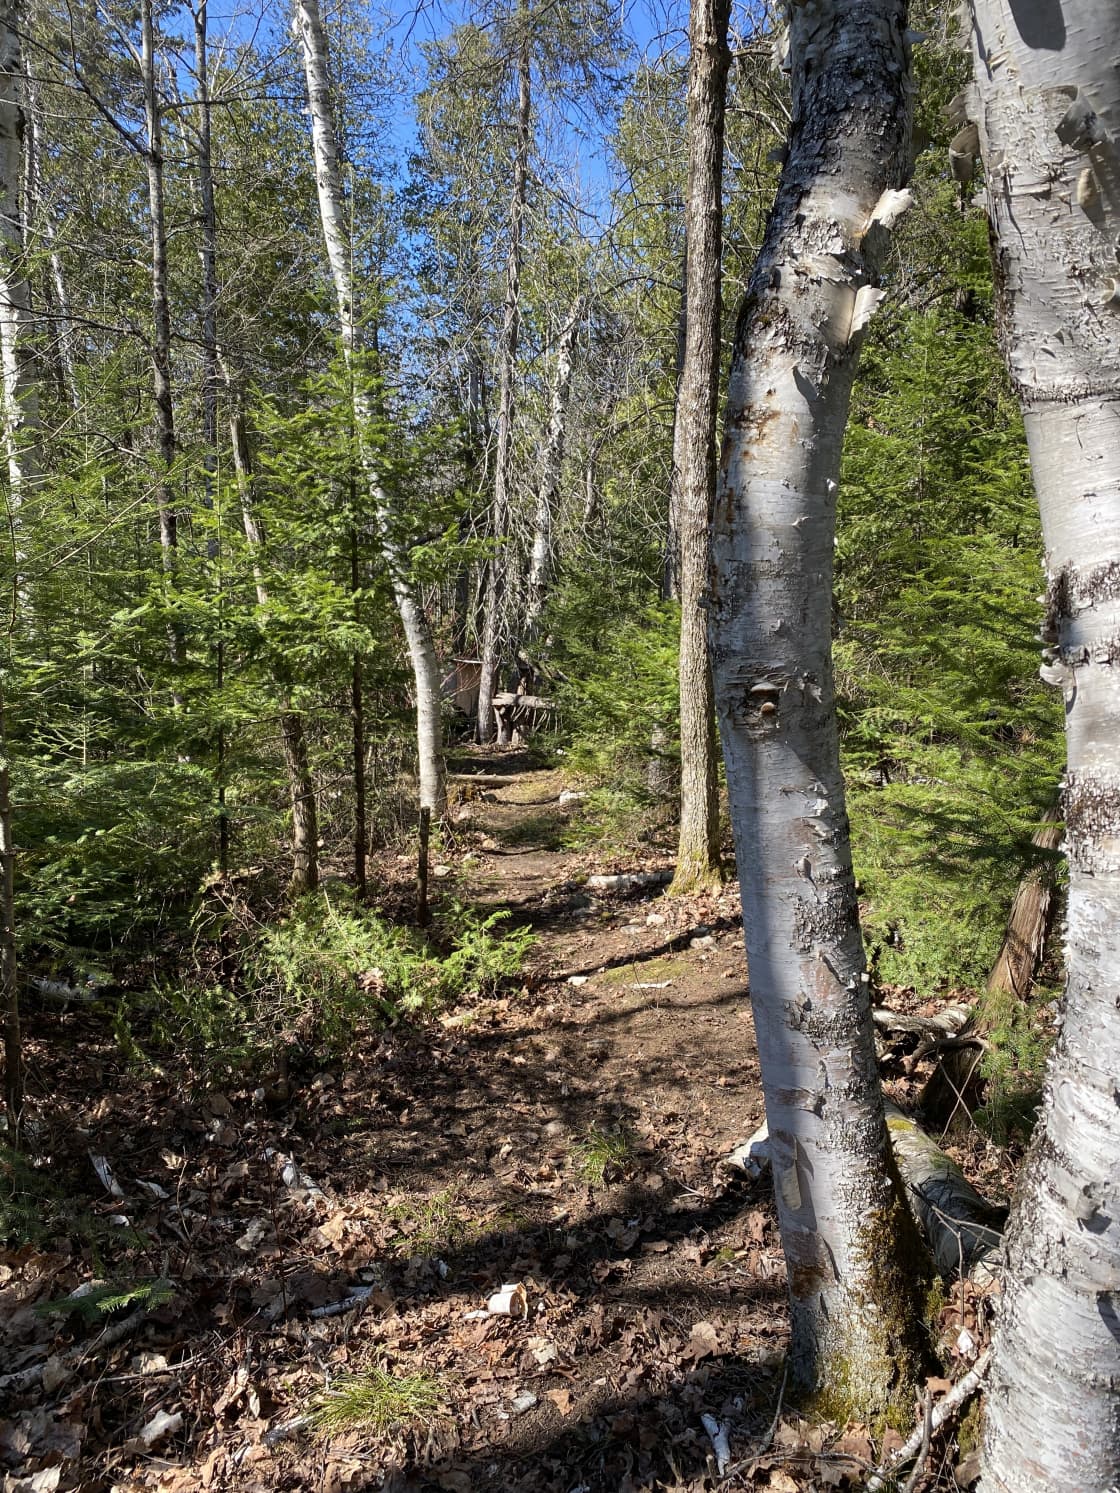 The trail to the outhouse